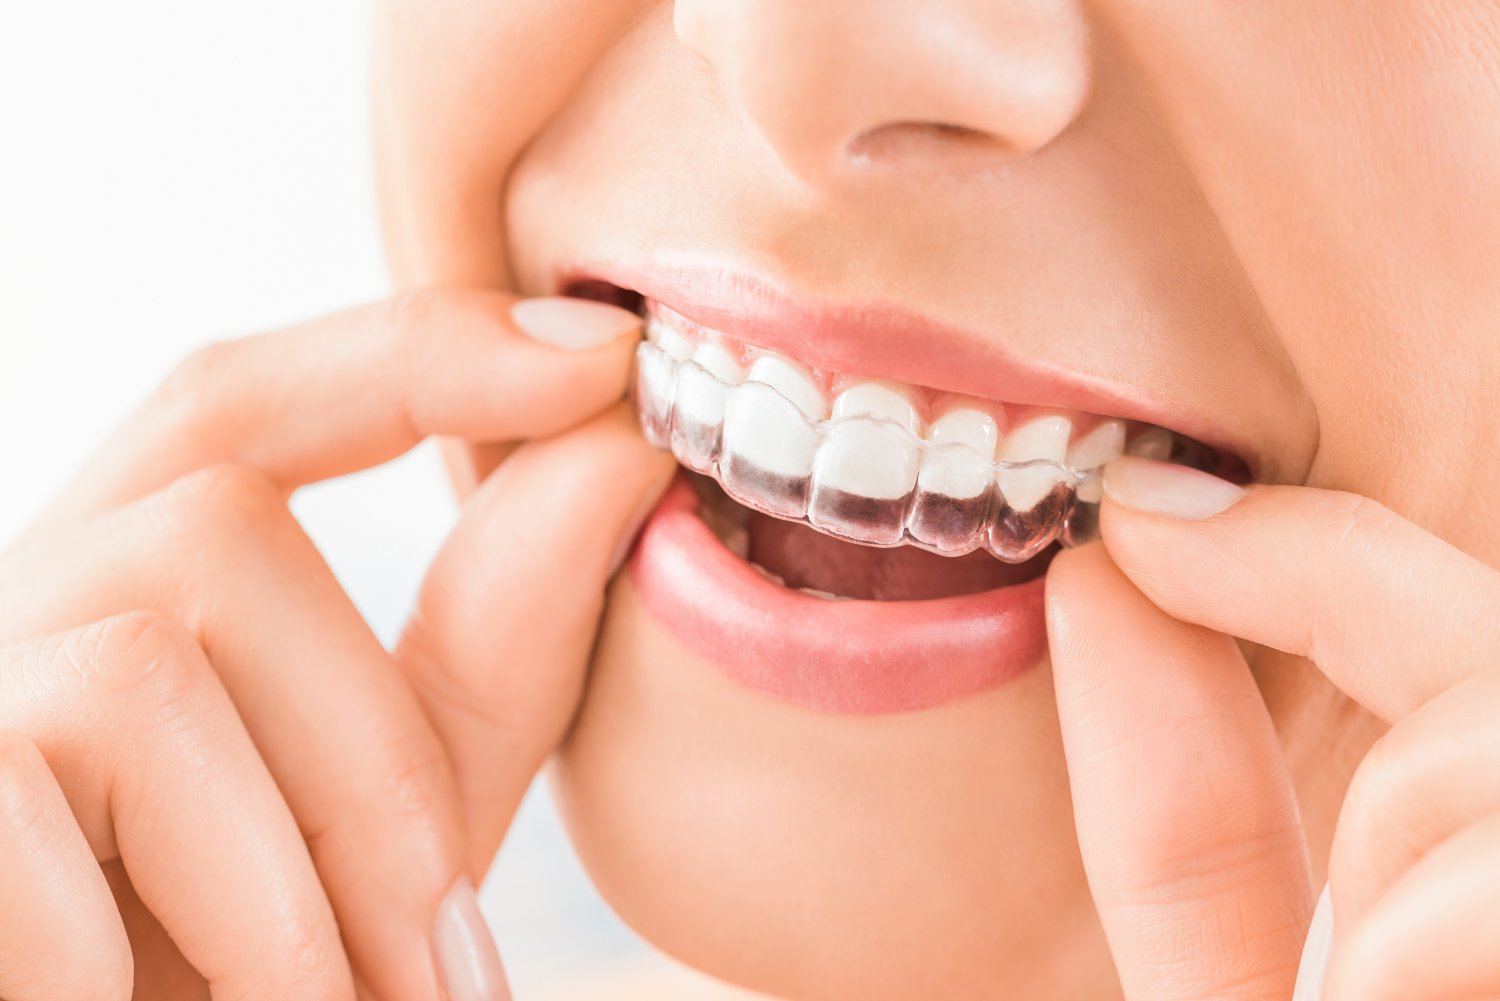 Invisalign is the “Clear Choice” for Straightening the Smile!